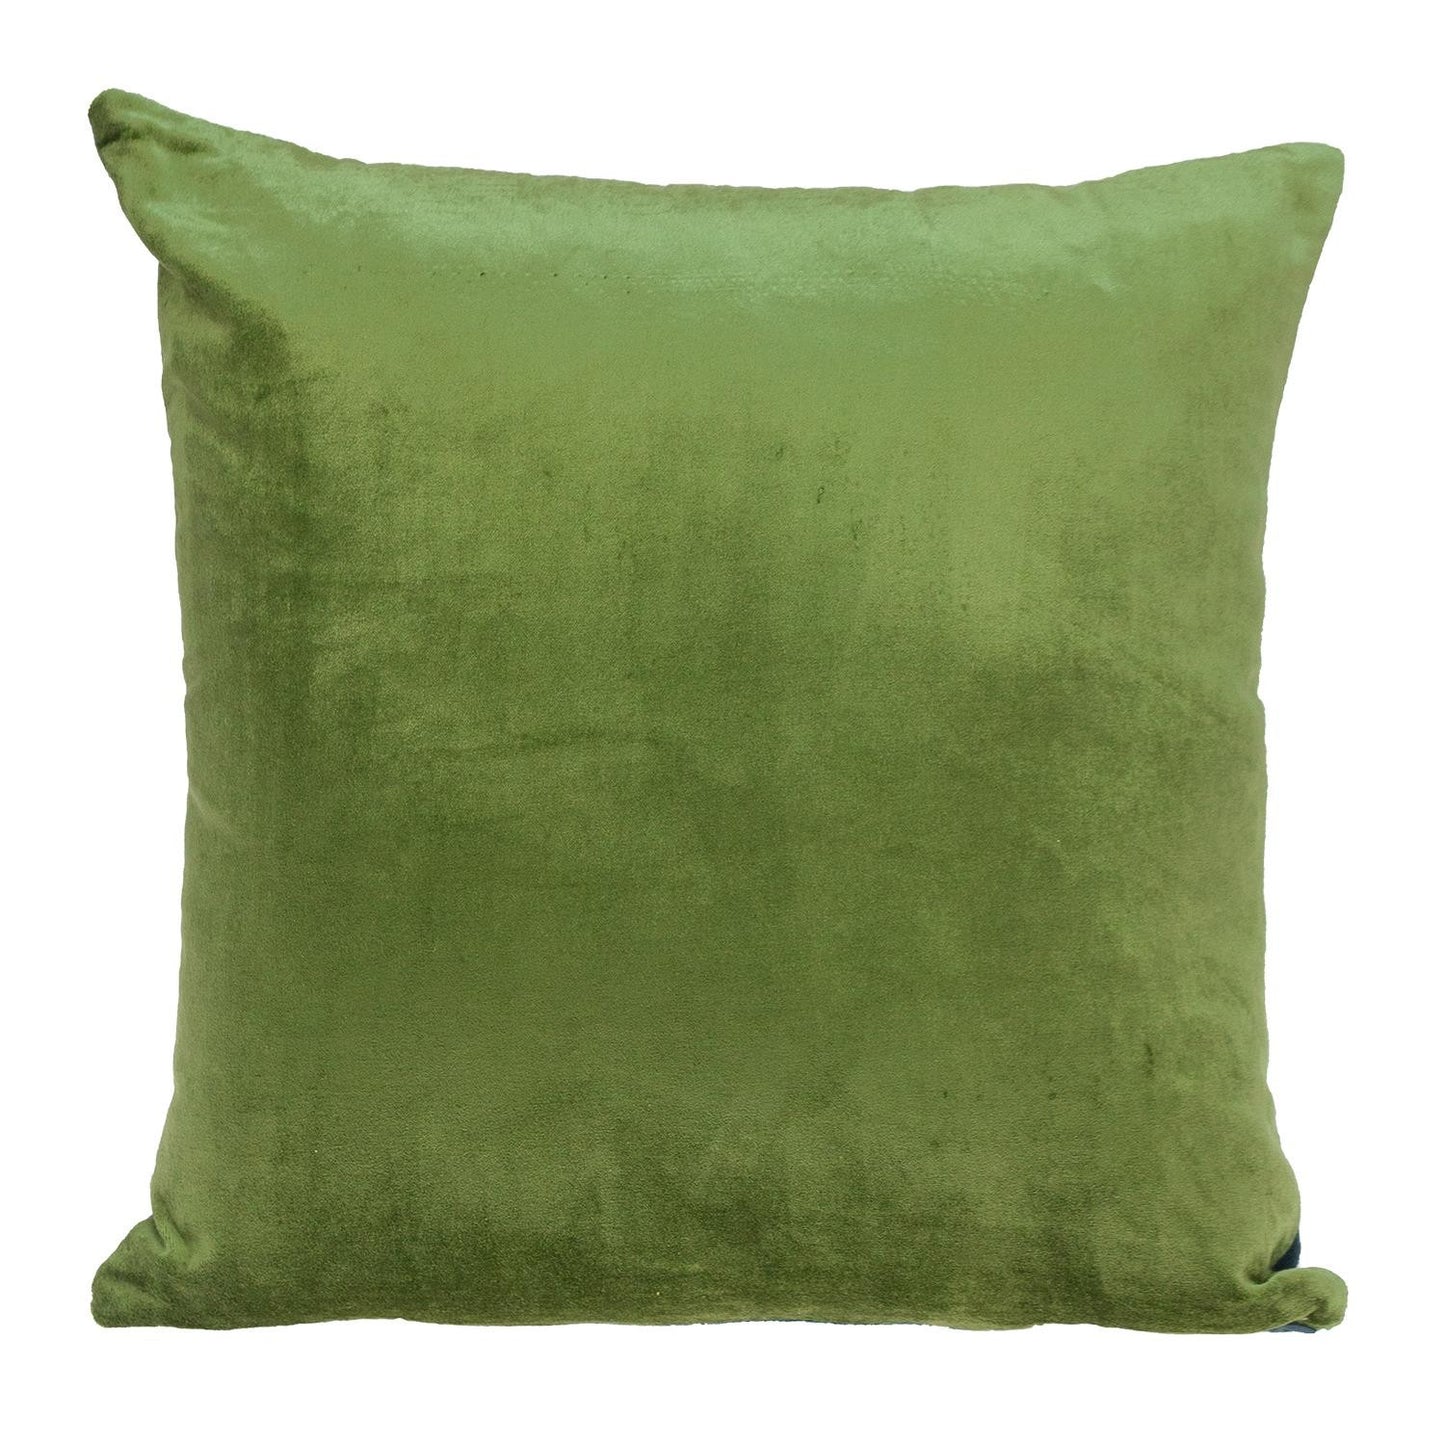 Green and Teal Dual Solid Color Reversible Throw Pillow